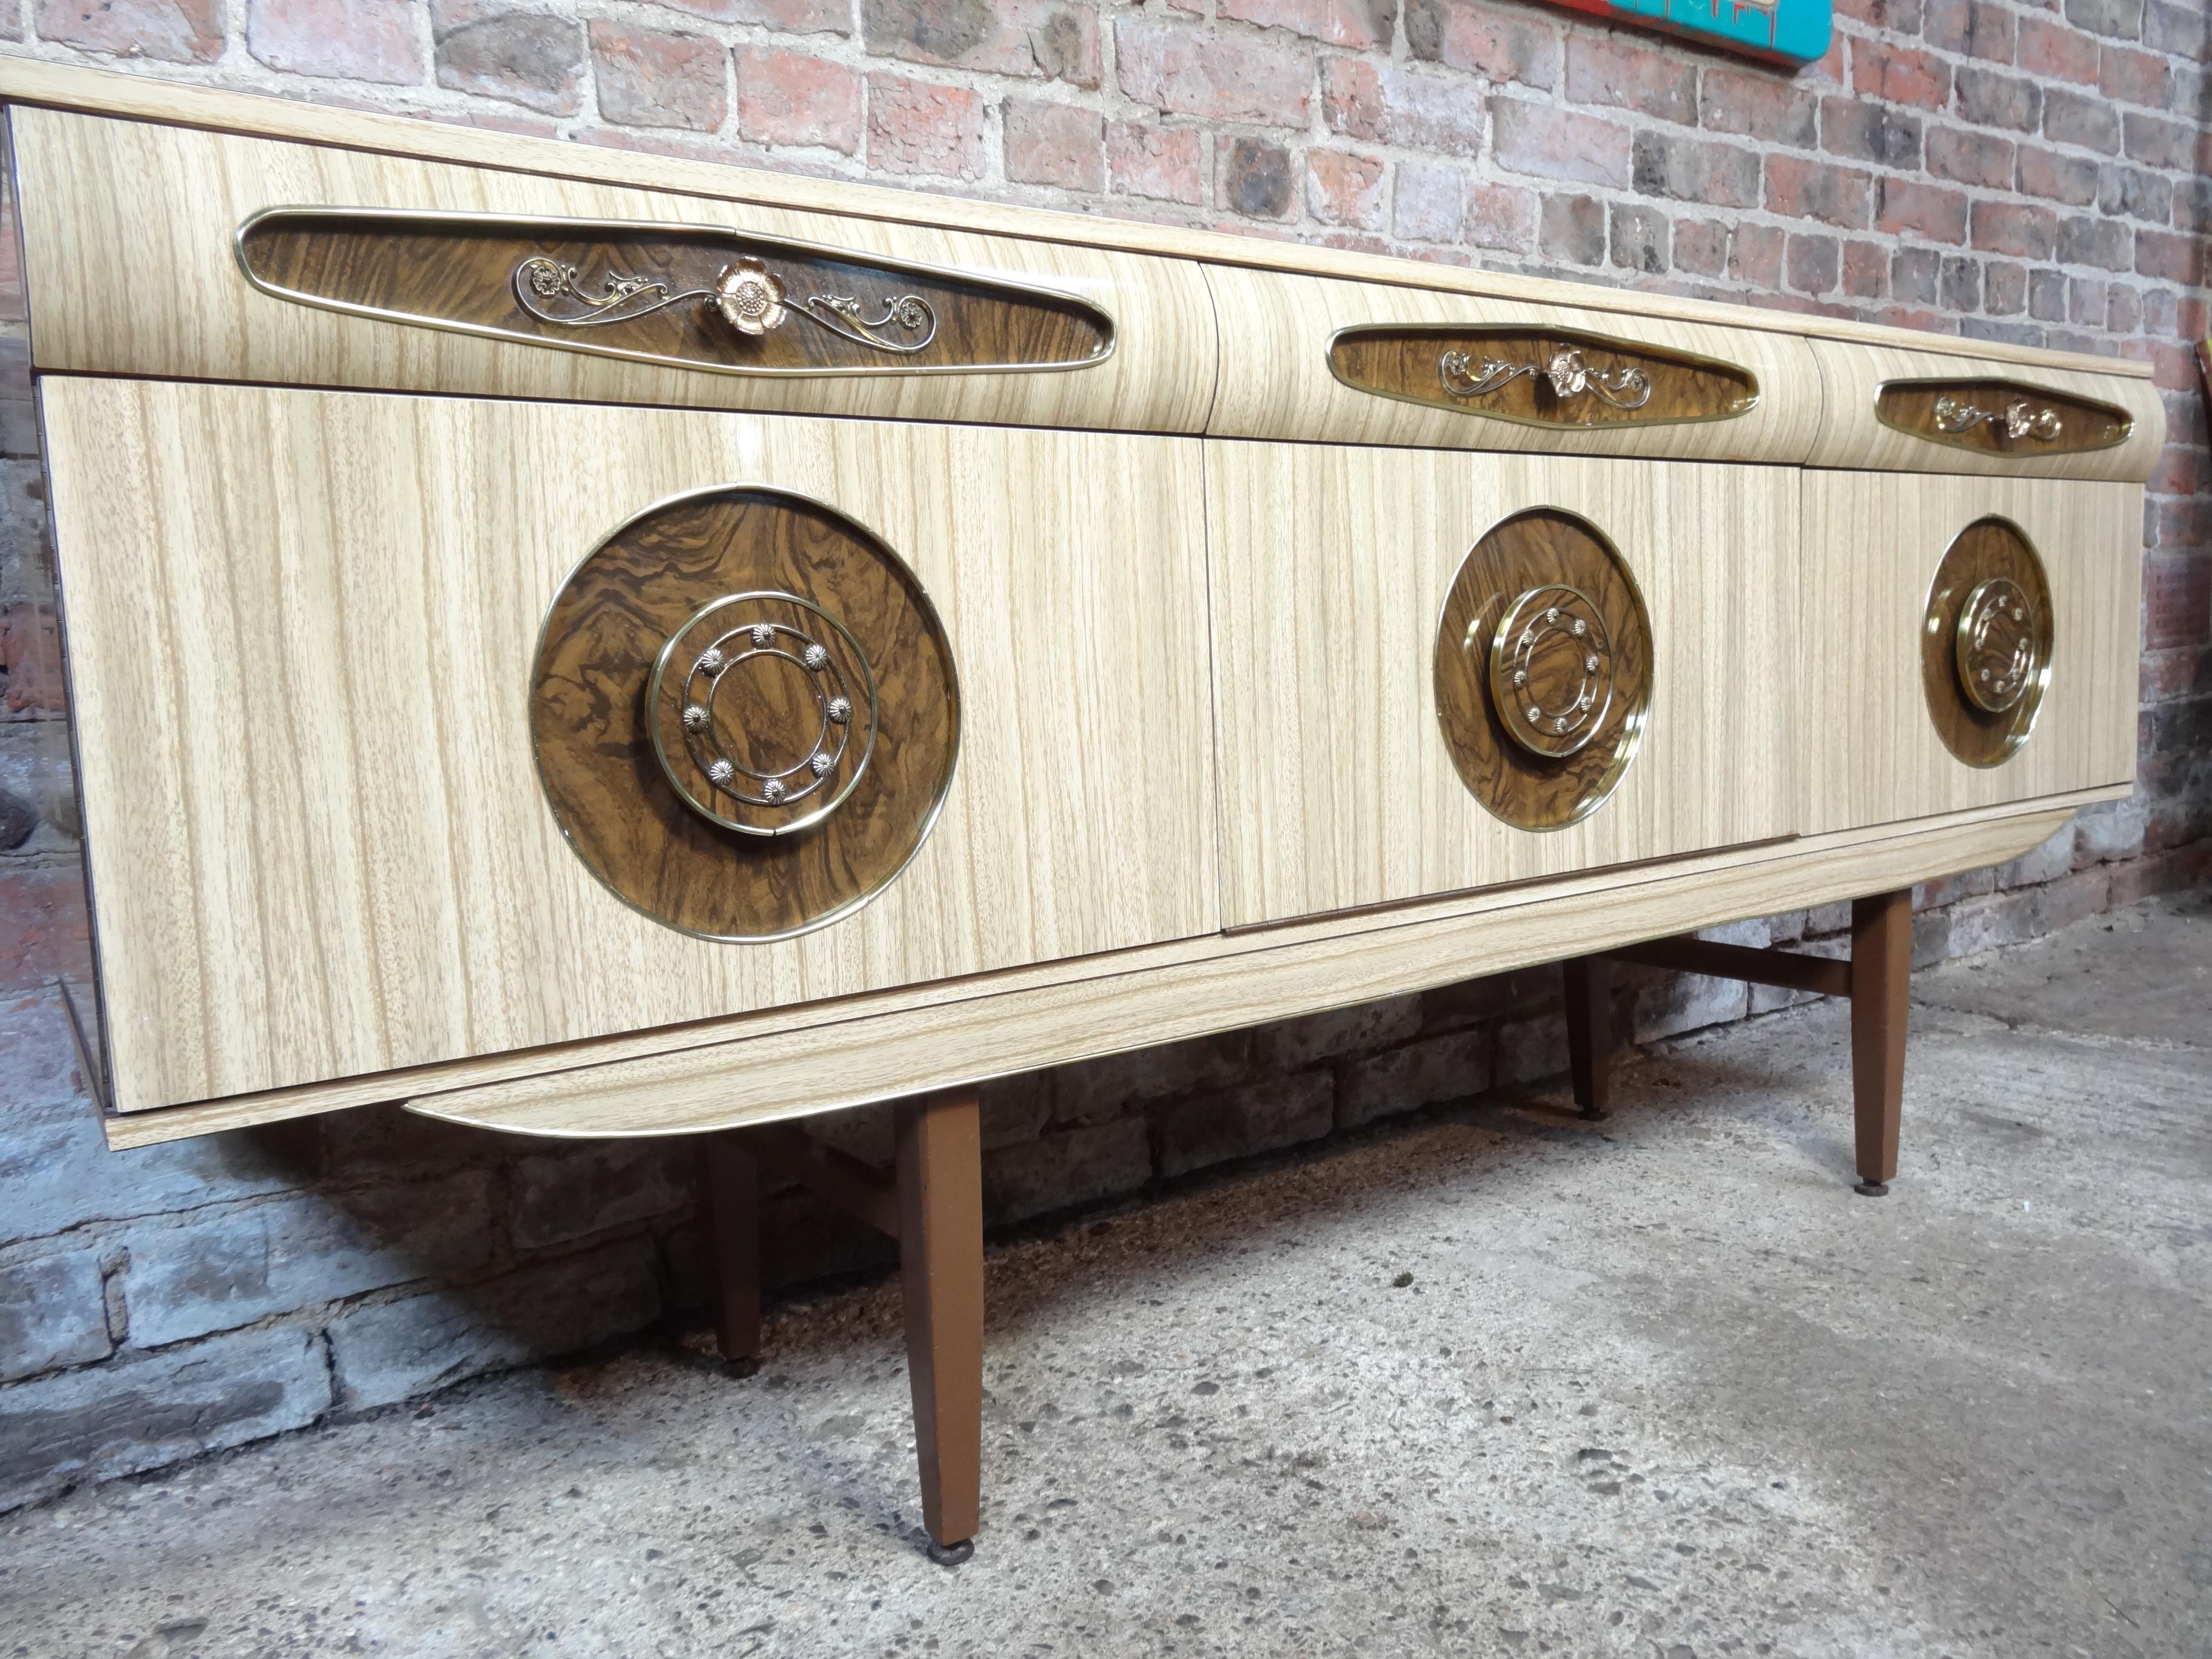 Sought after Vintage Retro Italian Sideboard with Brass Handles from 1950s In Good Condition For Sale In Markington, GB